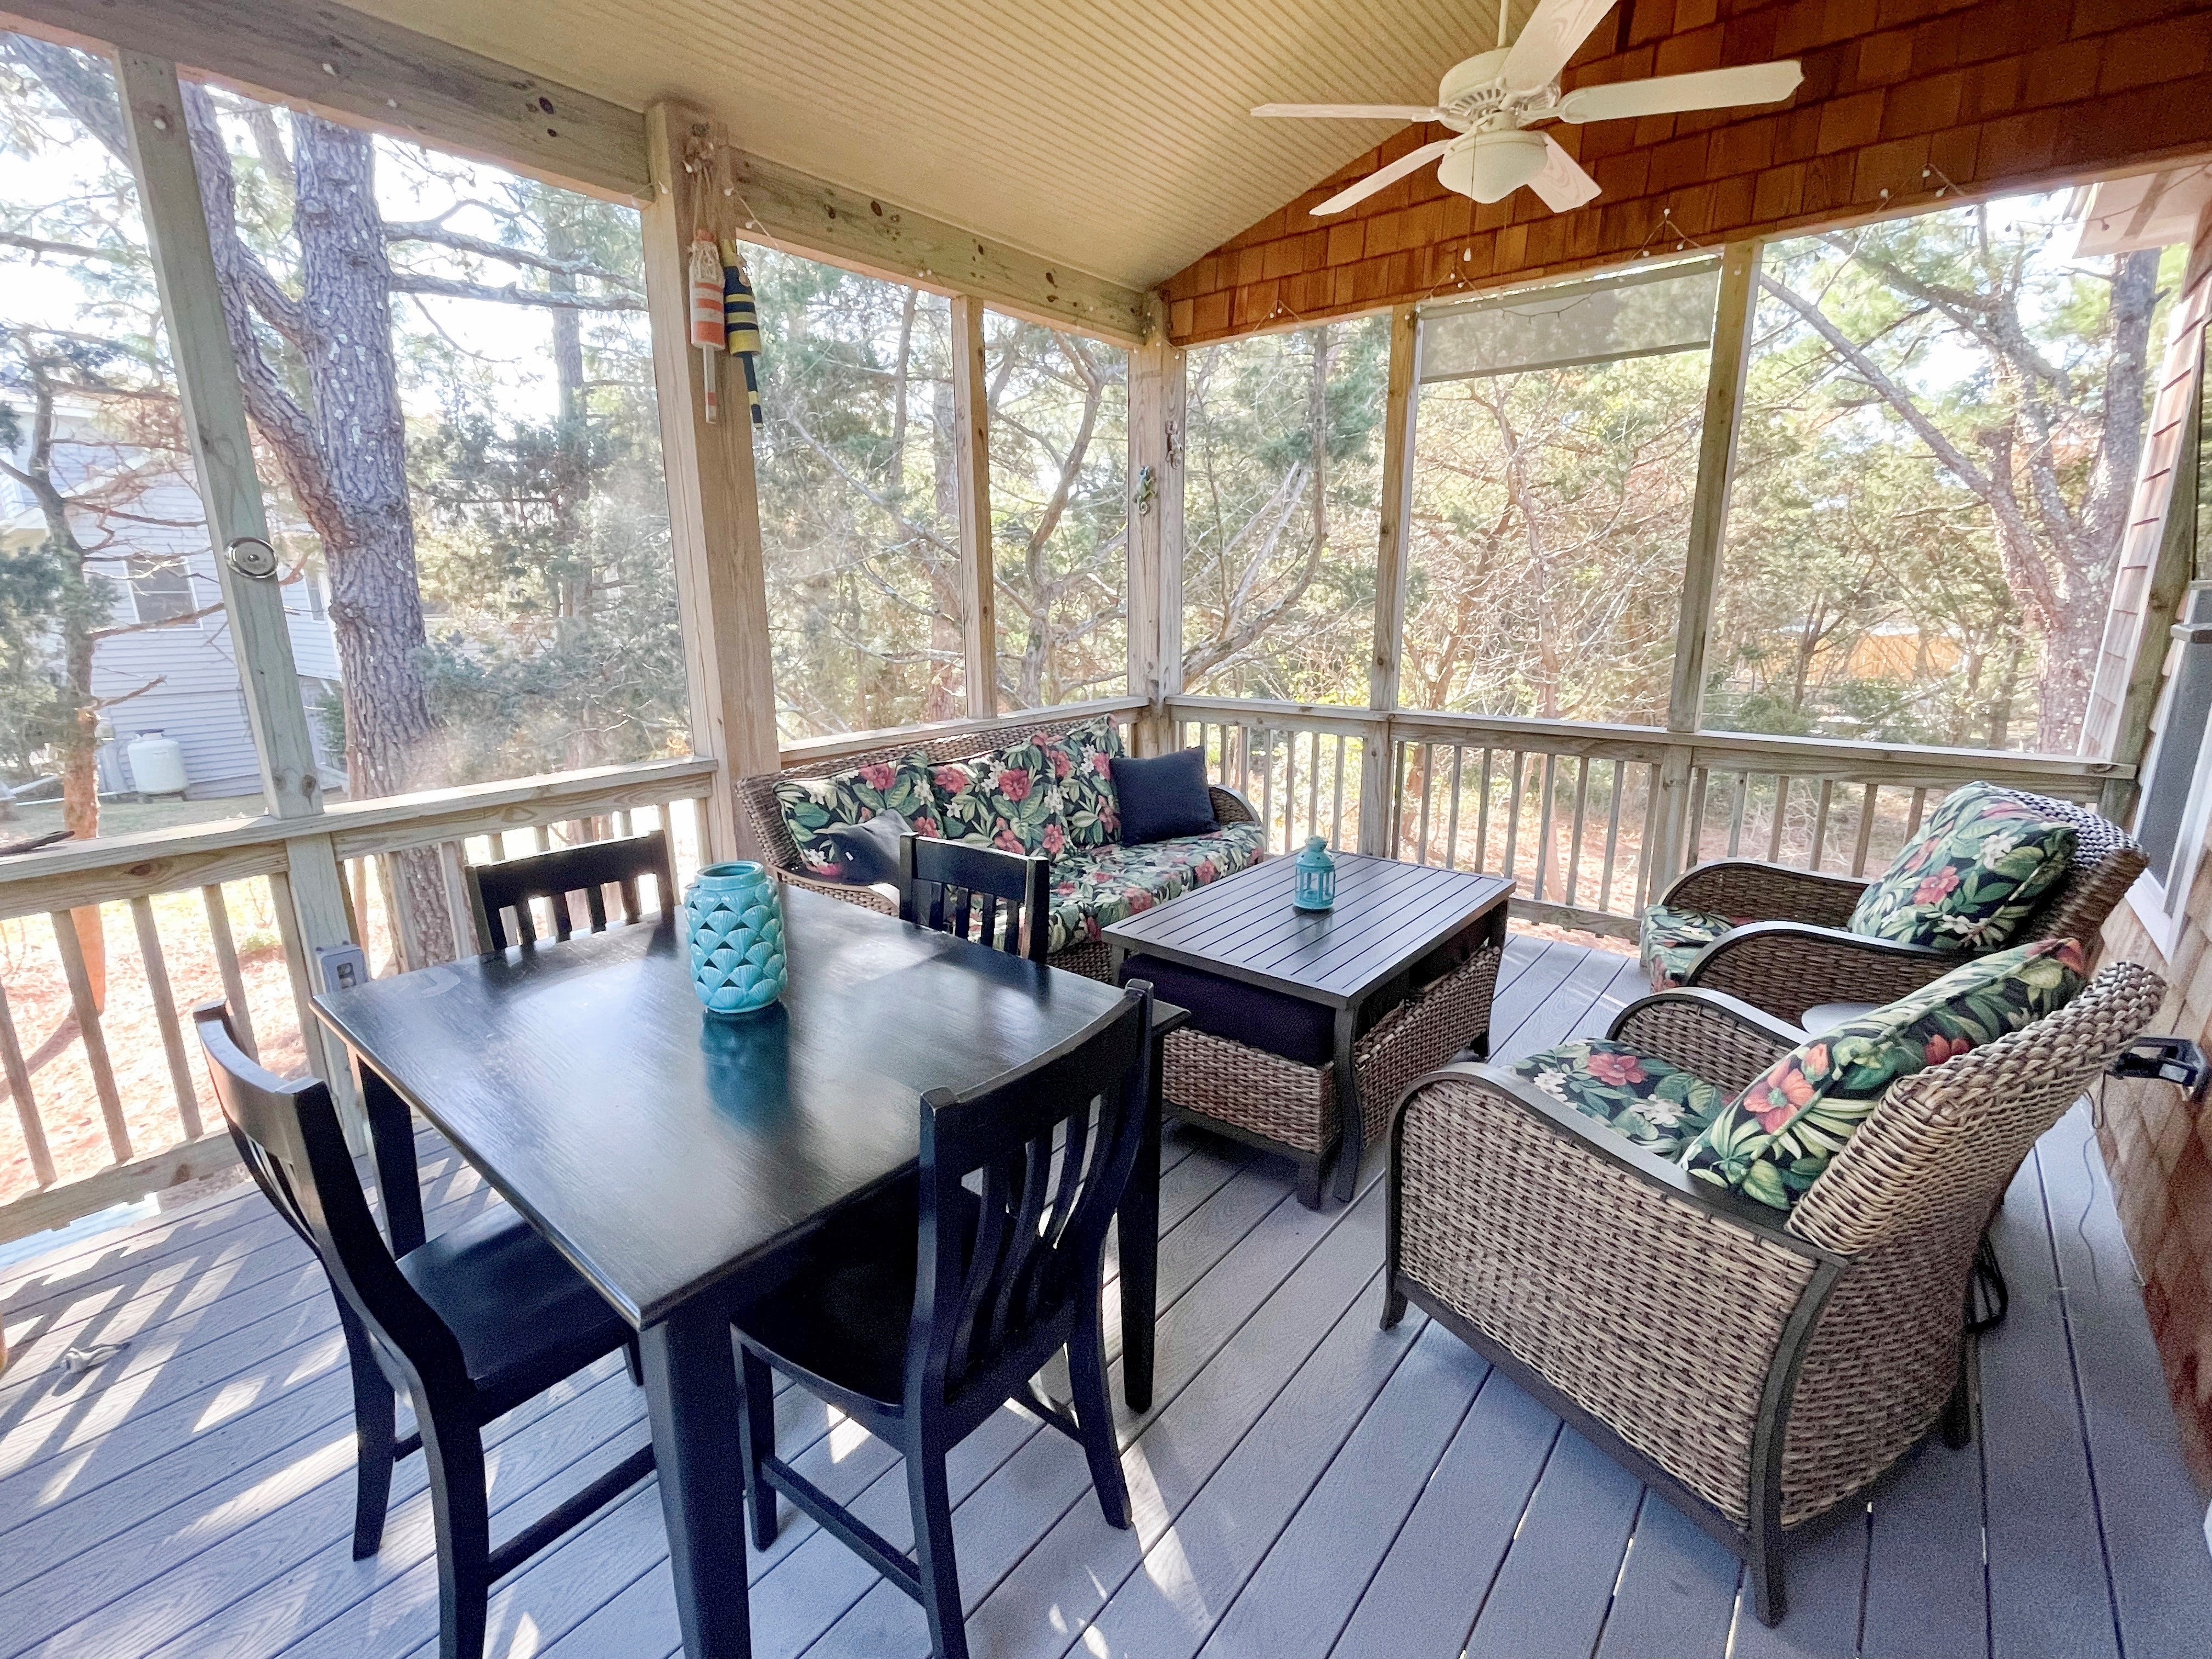 Screened Porch with TV